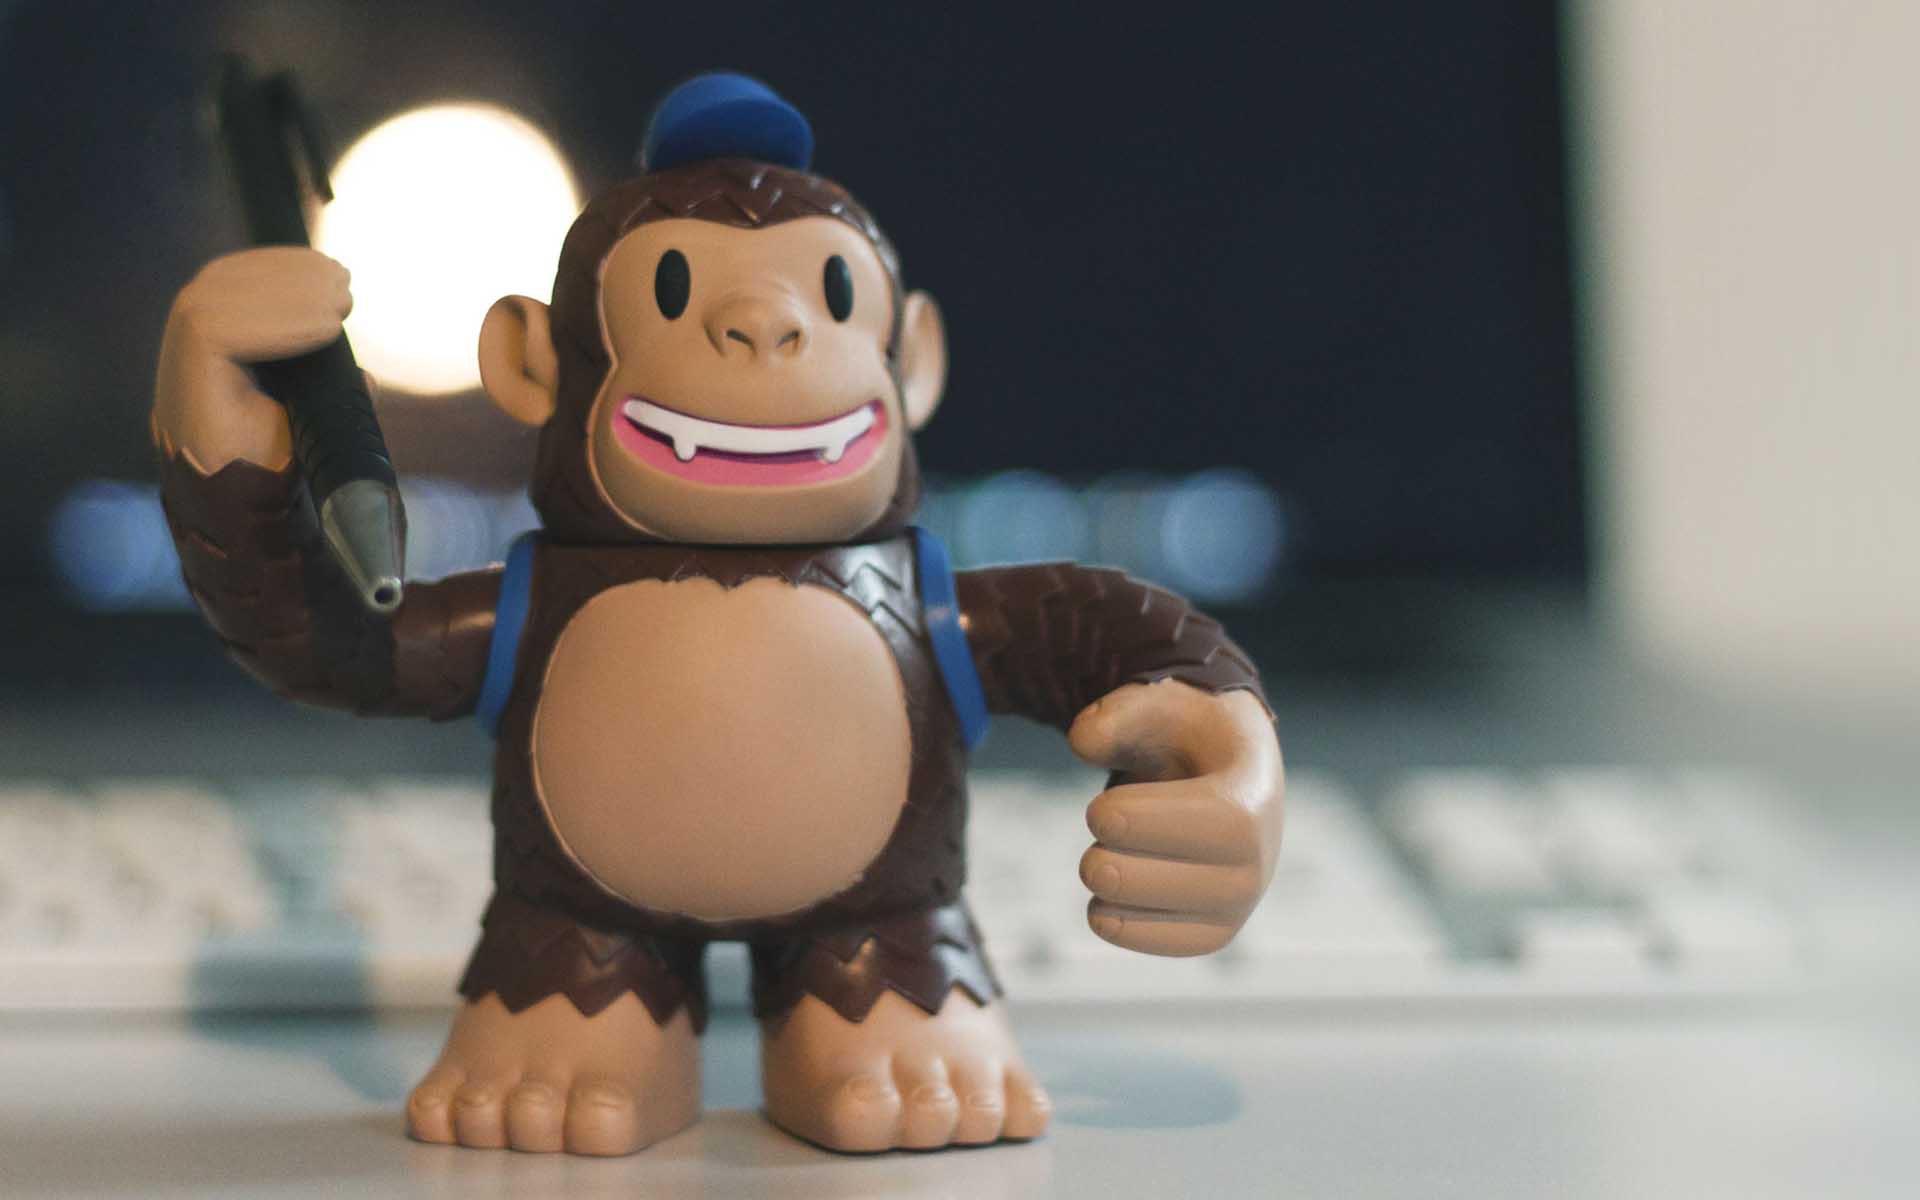 MailChimp Begins Shutting Down Cryptocurrency and ICO-related Accounts